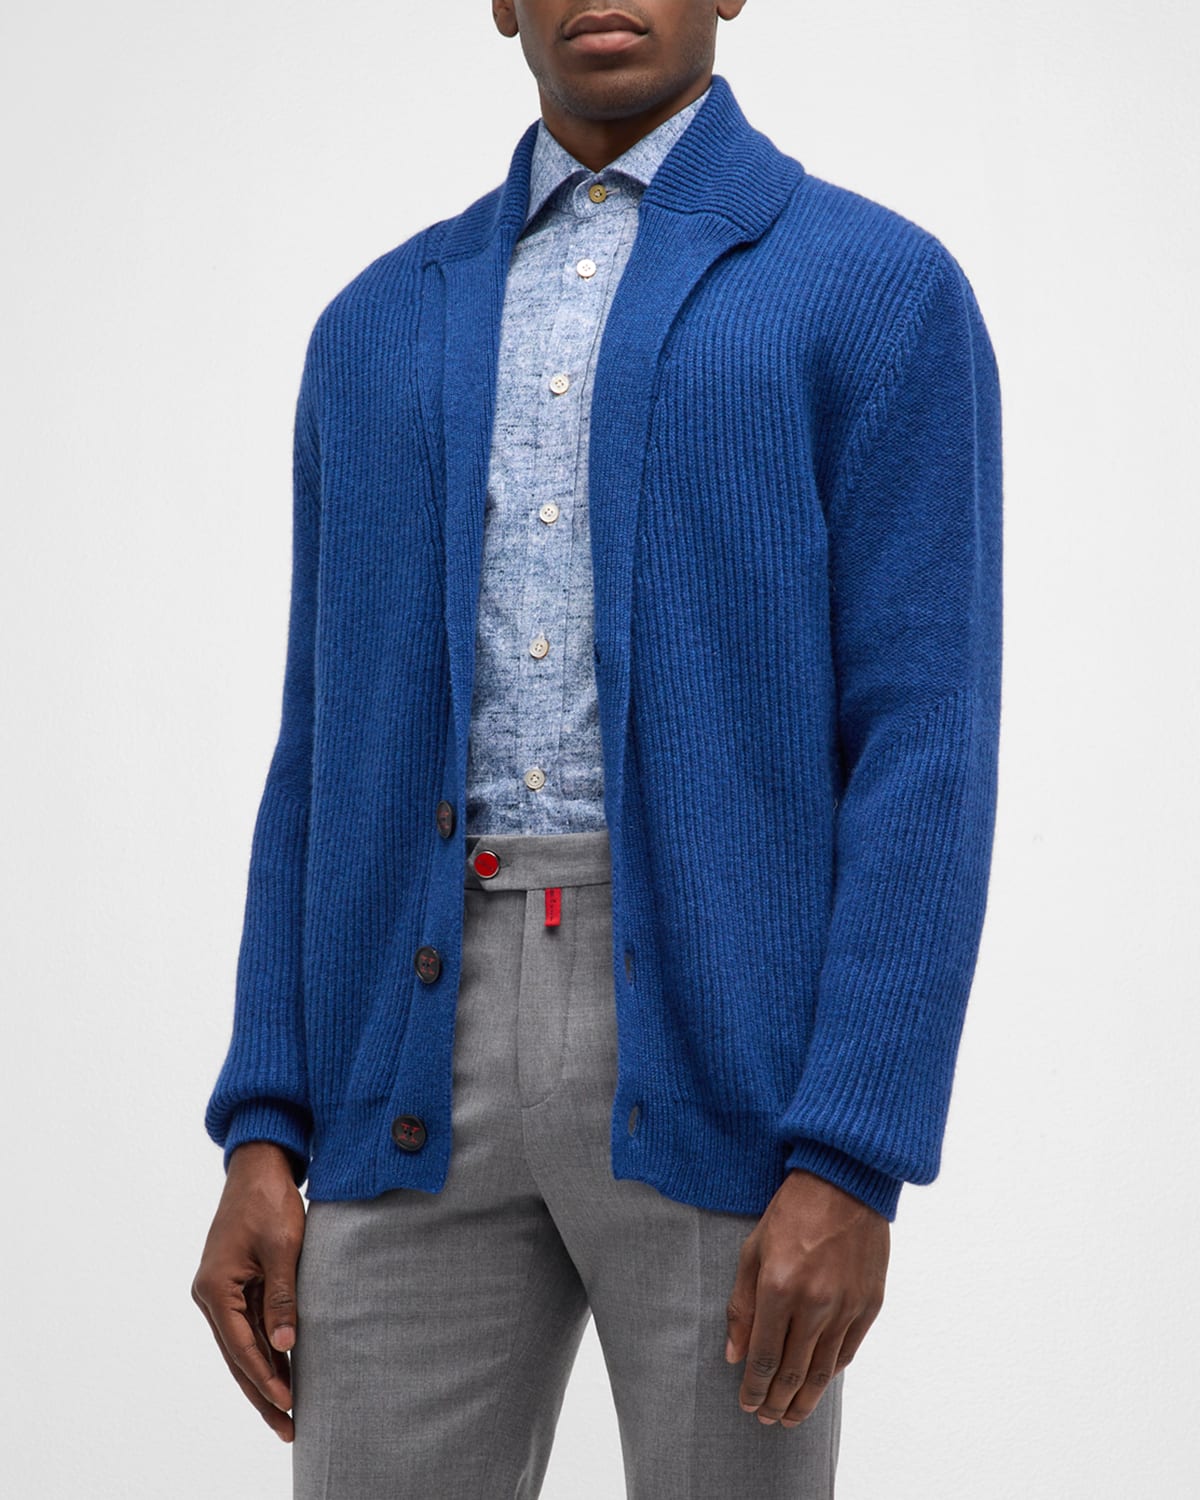 Kiton Men's Ribbed Cashmere Cardigan Sweater In Blue